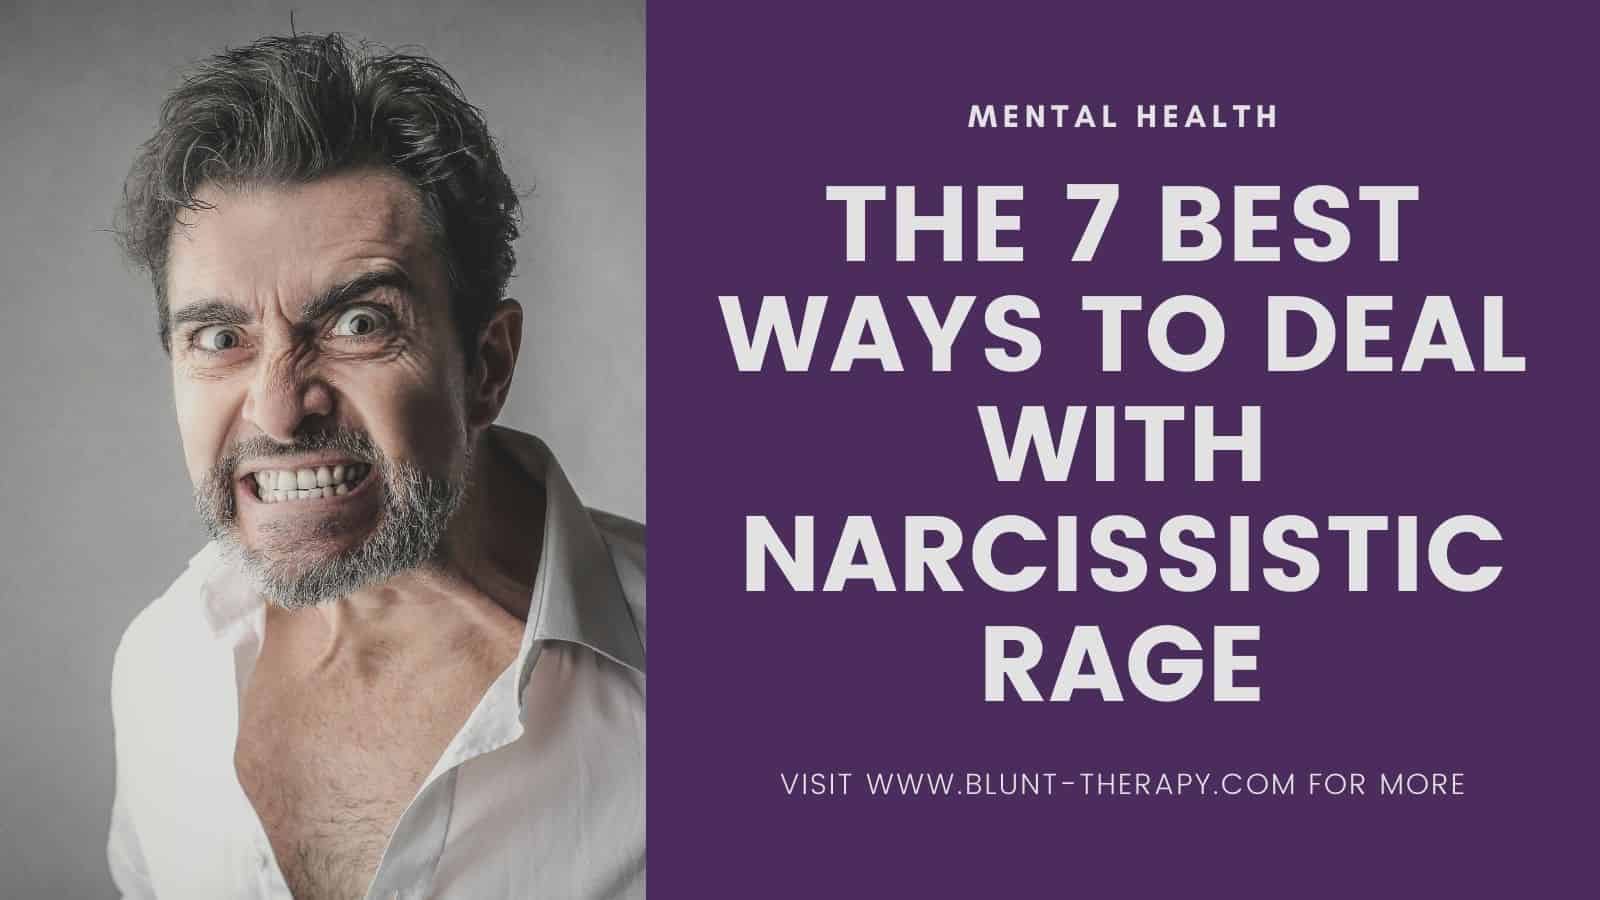 The 7 Best Ways To Deal With Narcissistic Rage